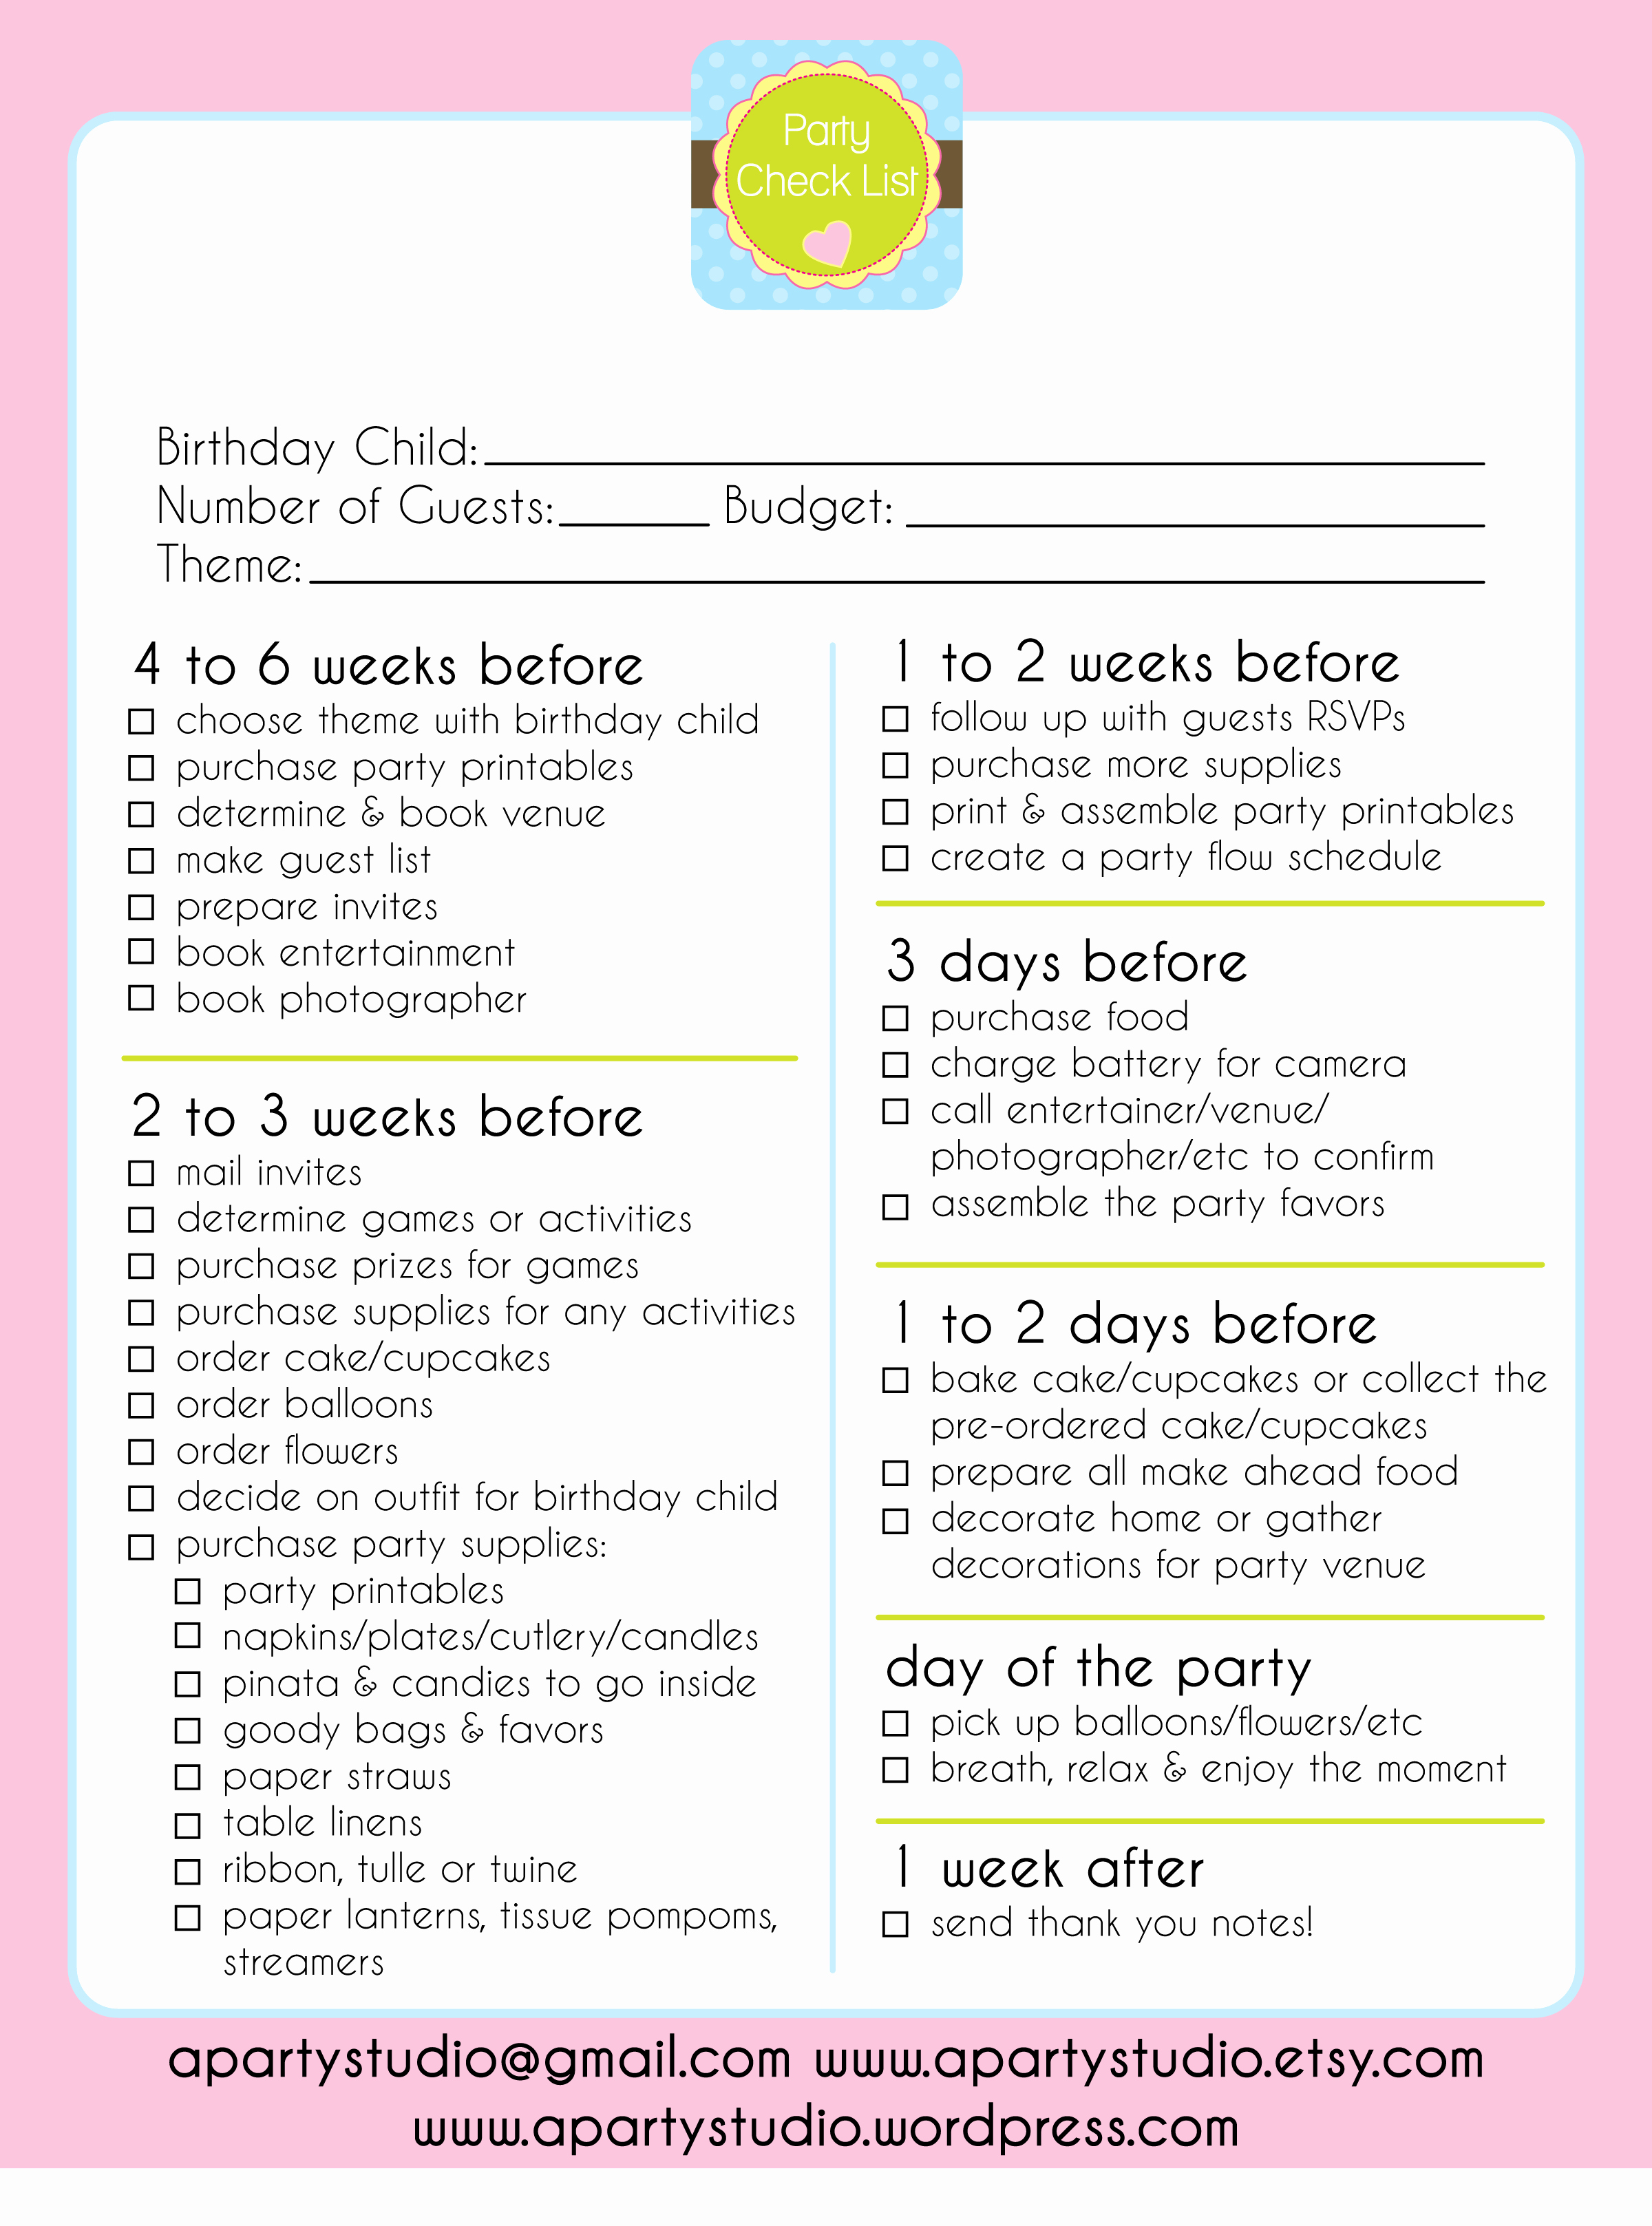 Party Plan Checklist Template Beautiful A Party Studio